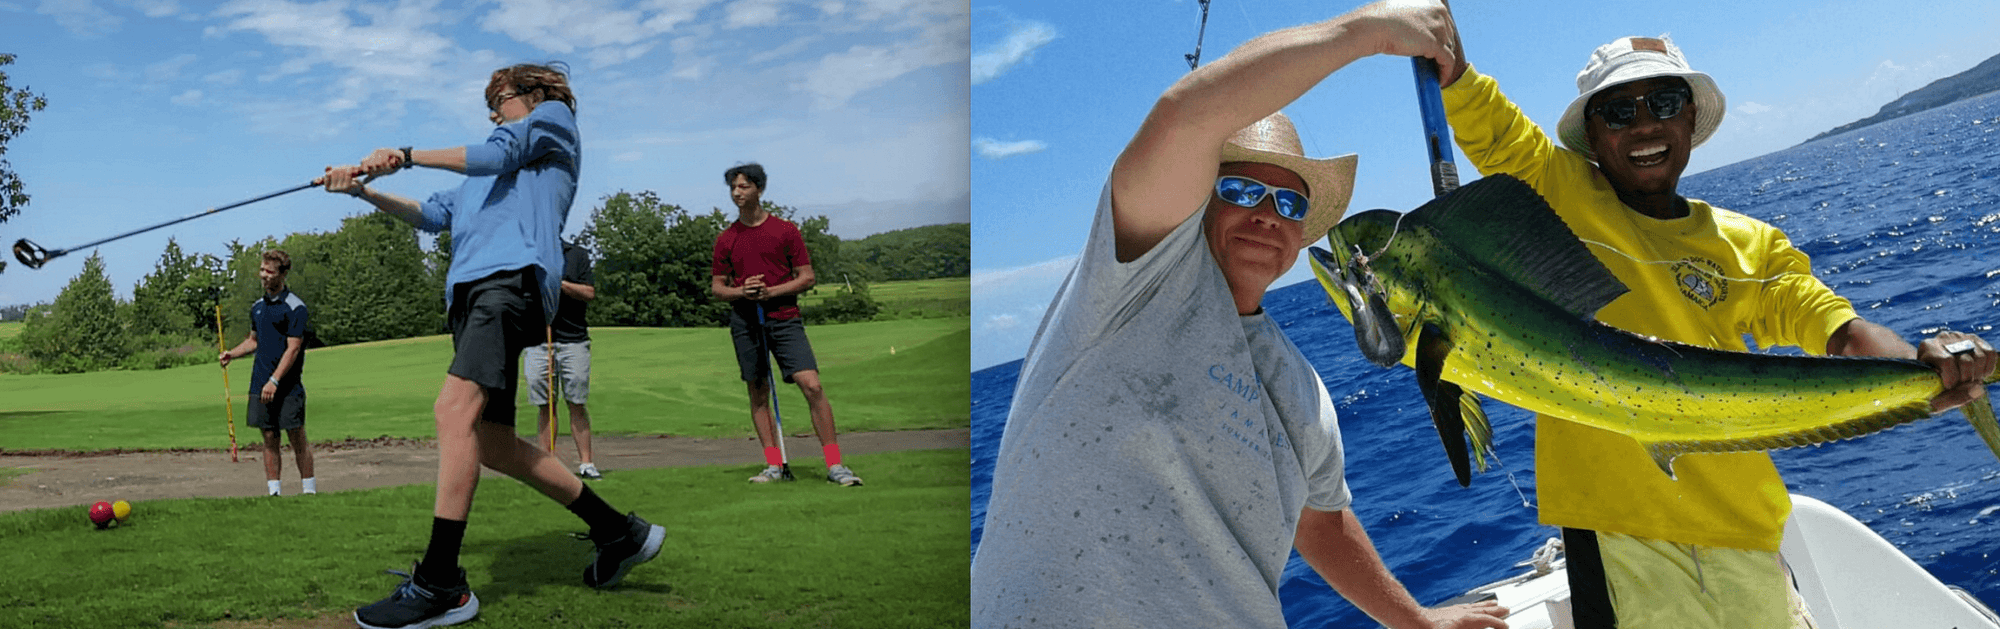 If Golf is Fly-fishing, is FlingGolf just good old fishing?